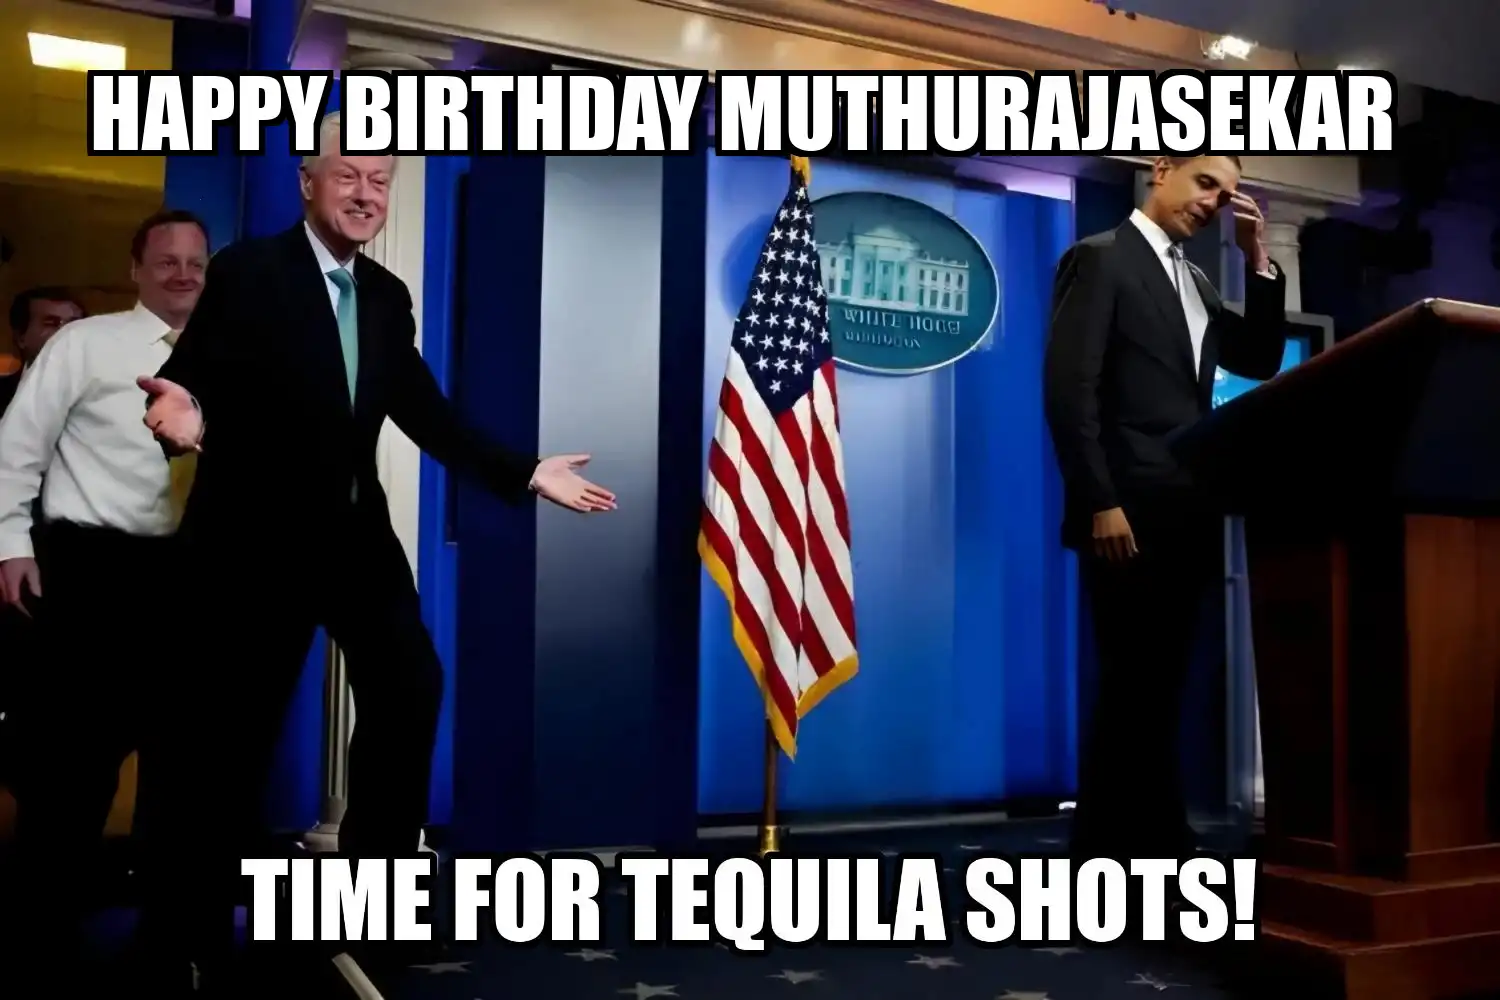 Happy Birthday Muthurajasekar Time For Tequila Shots Memes